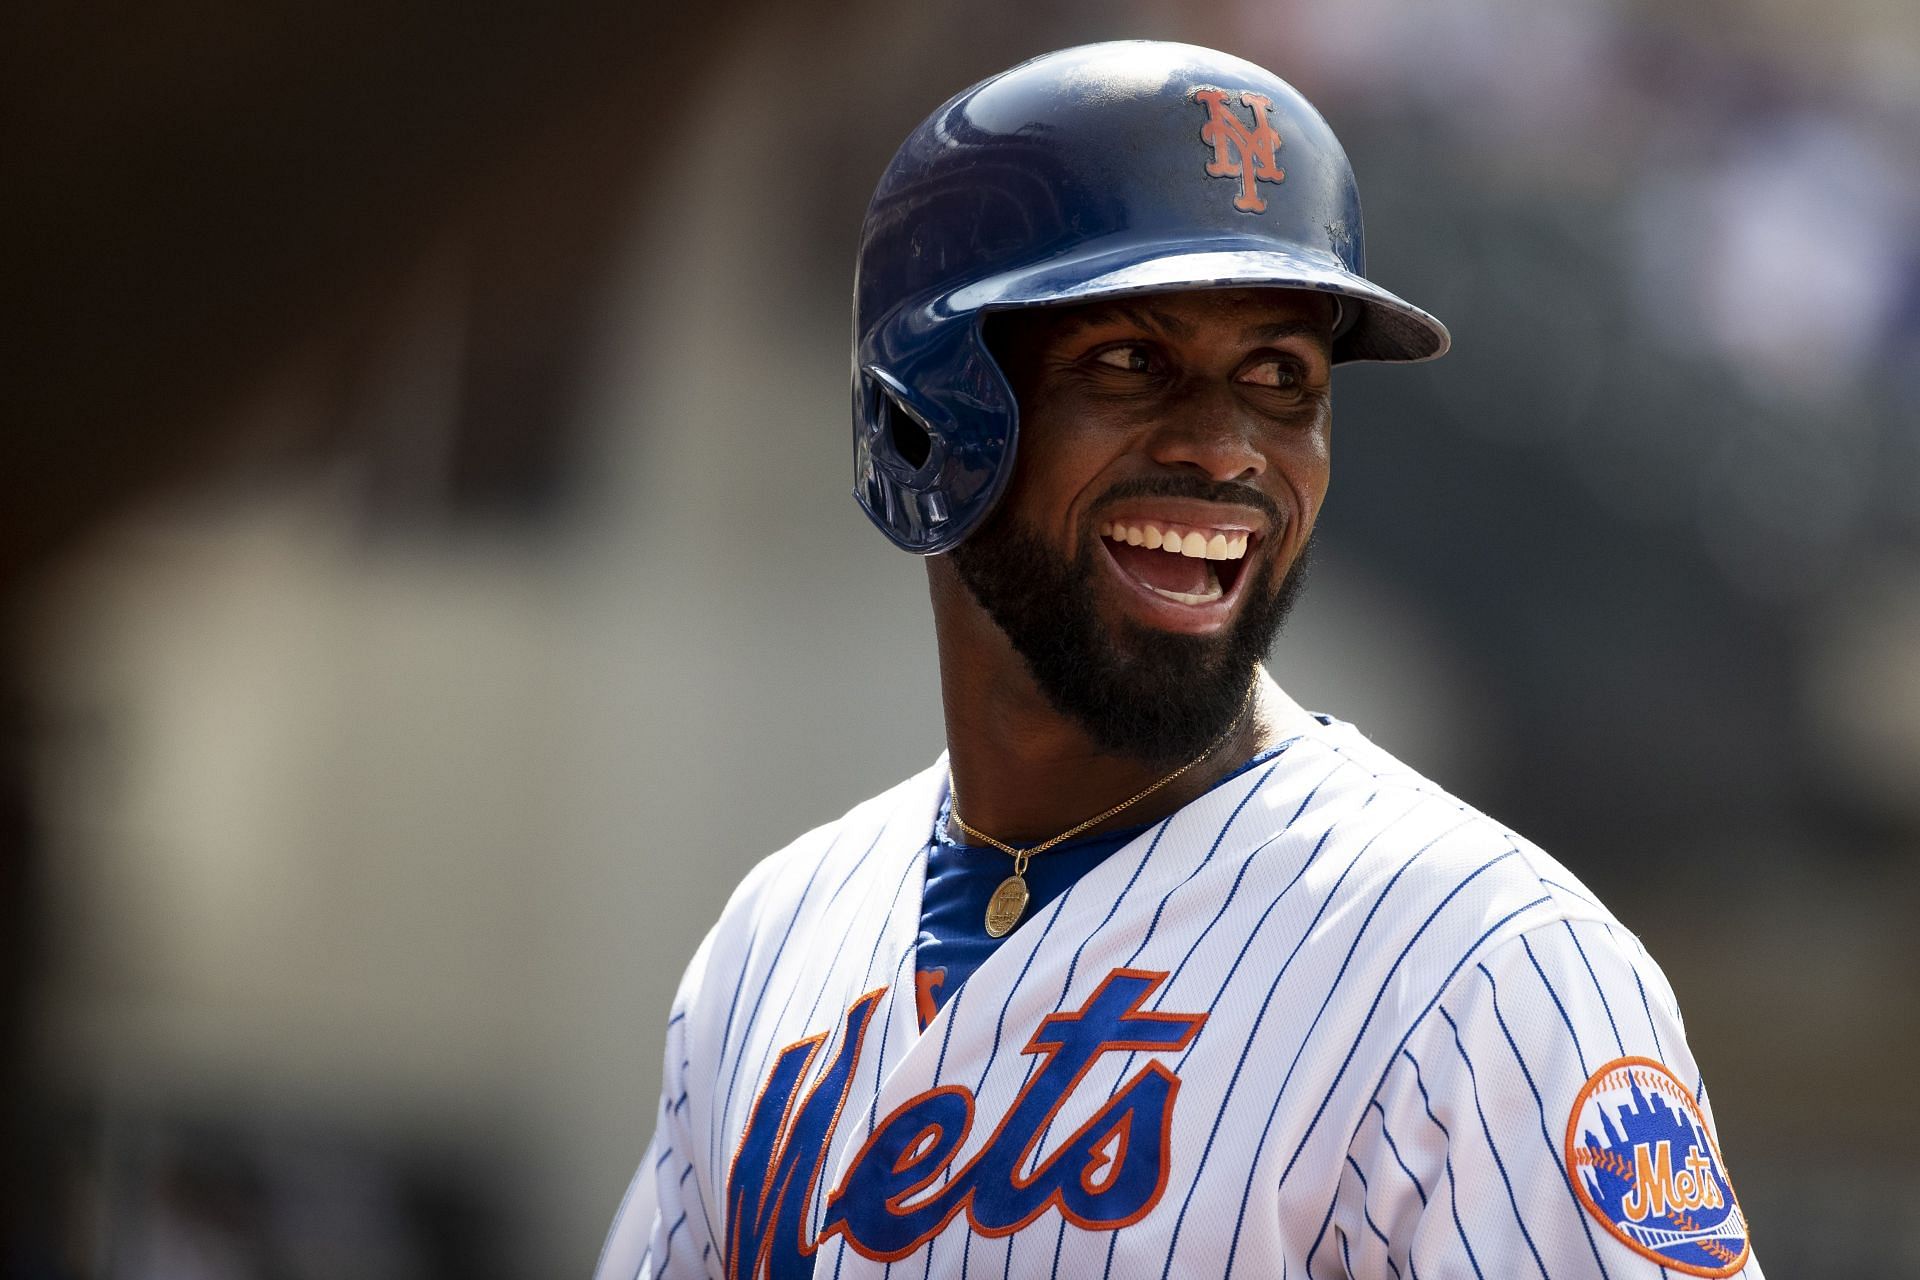 Former fan favorite Jose Reyes returns to the Mets after domestic